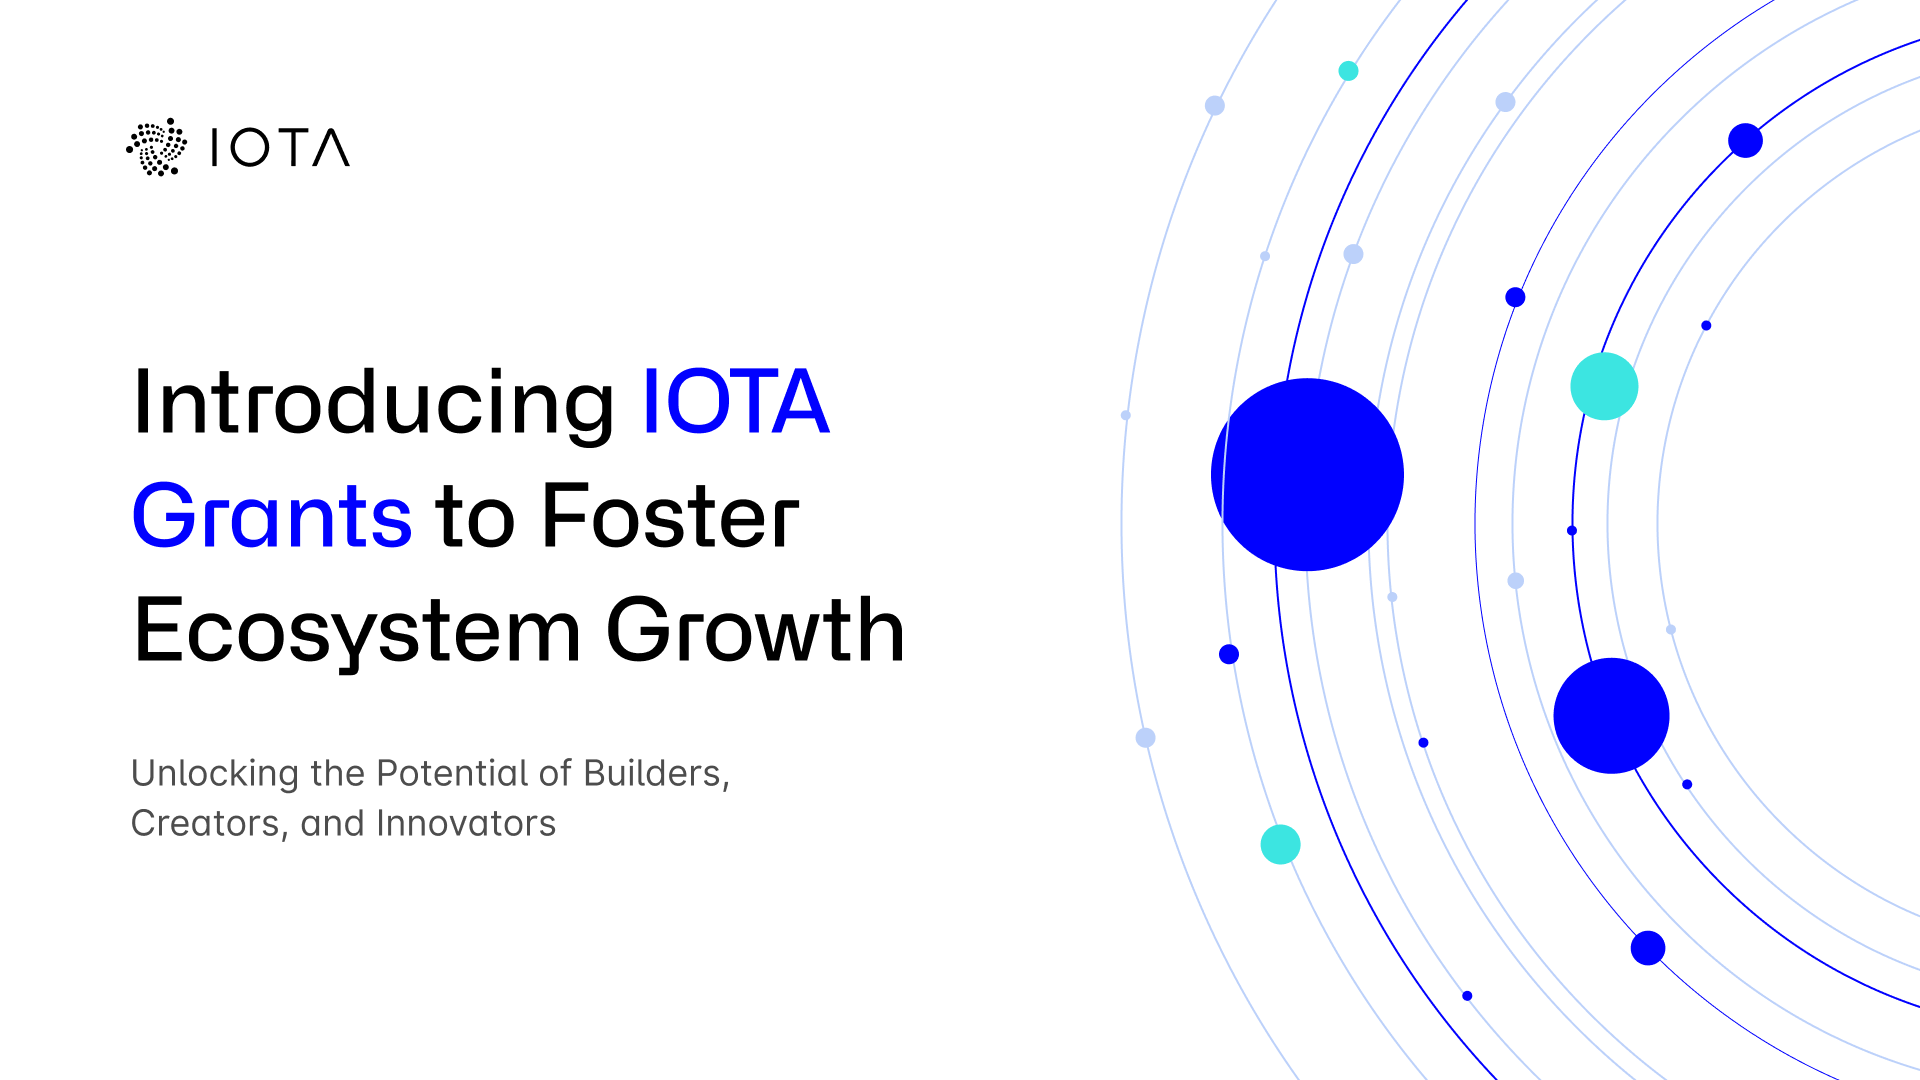 Introducing IOTA Grants to Foster Ecosystem Growth